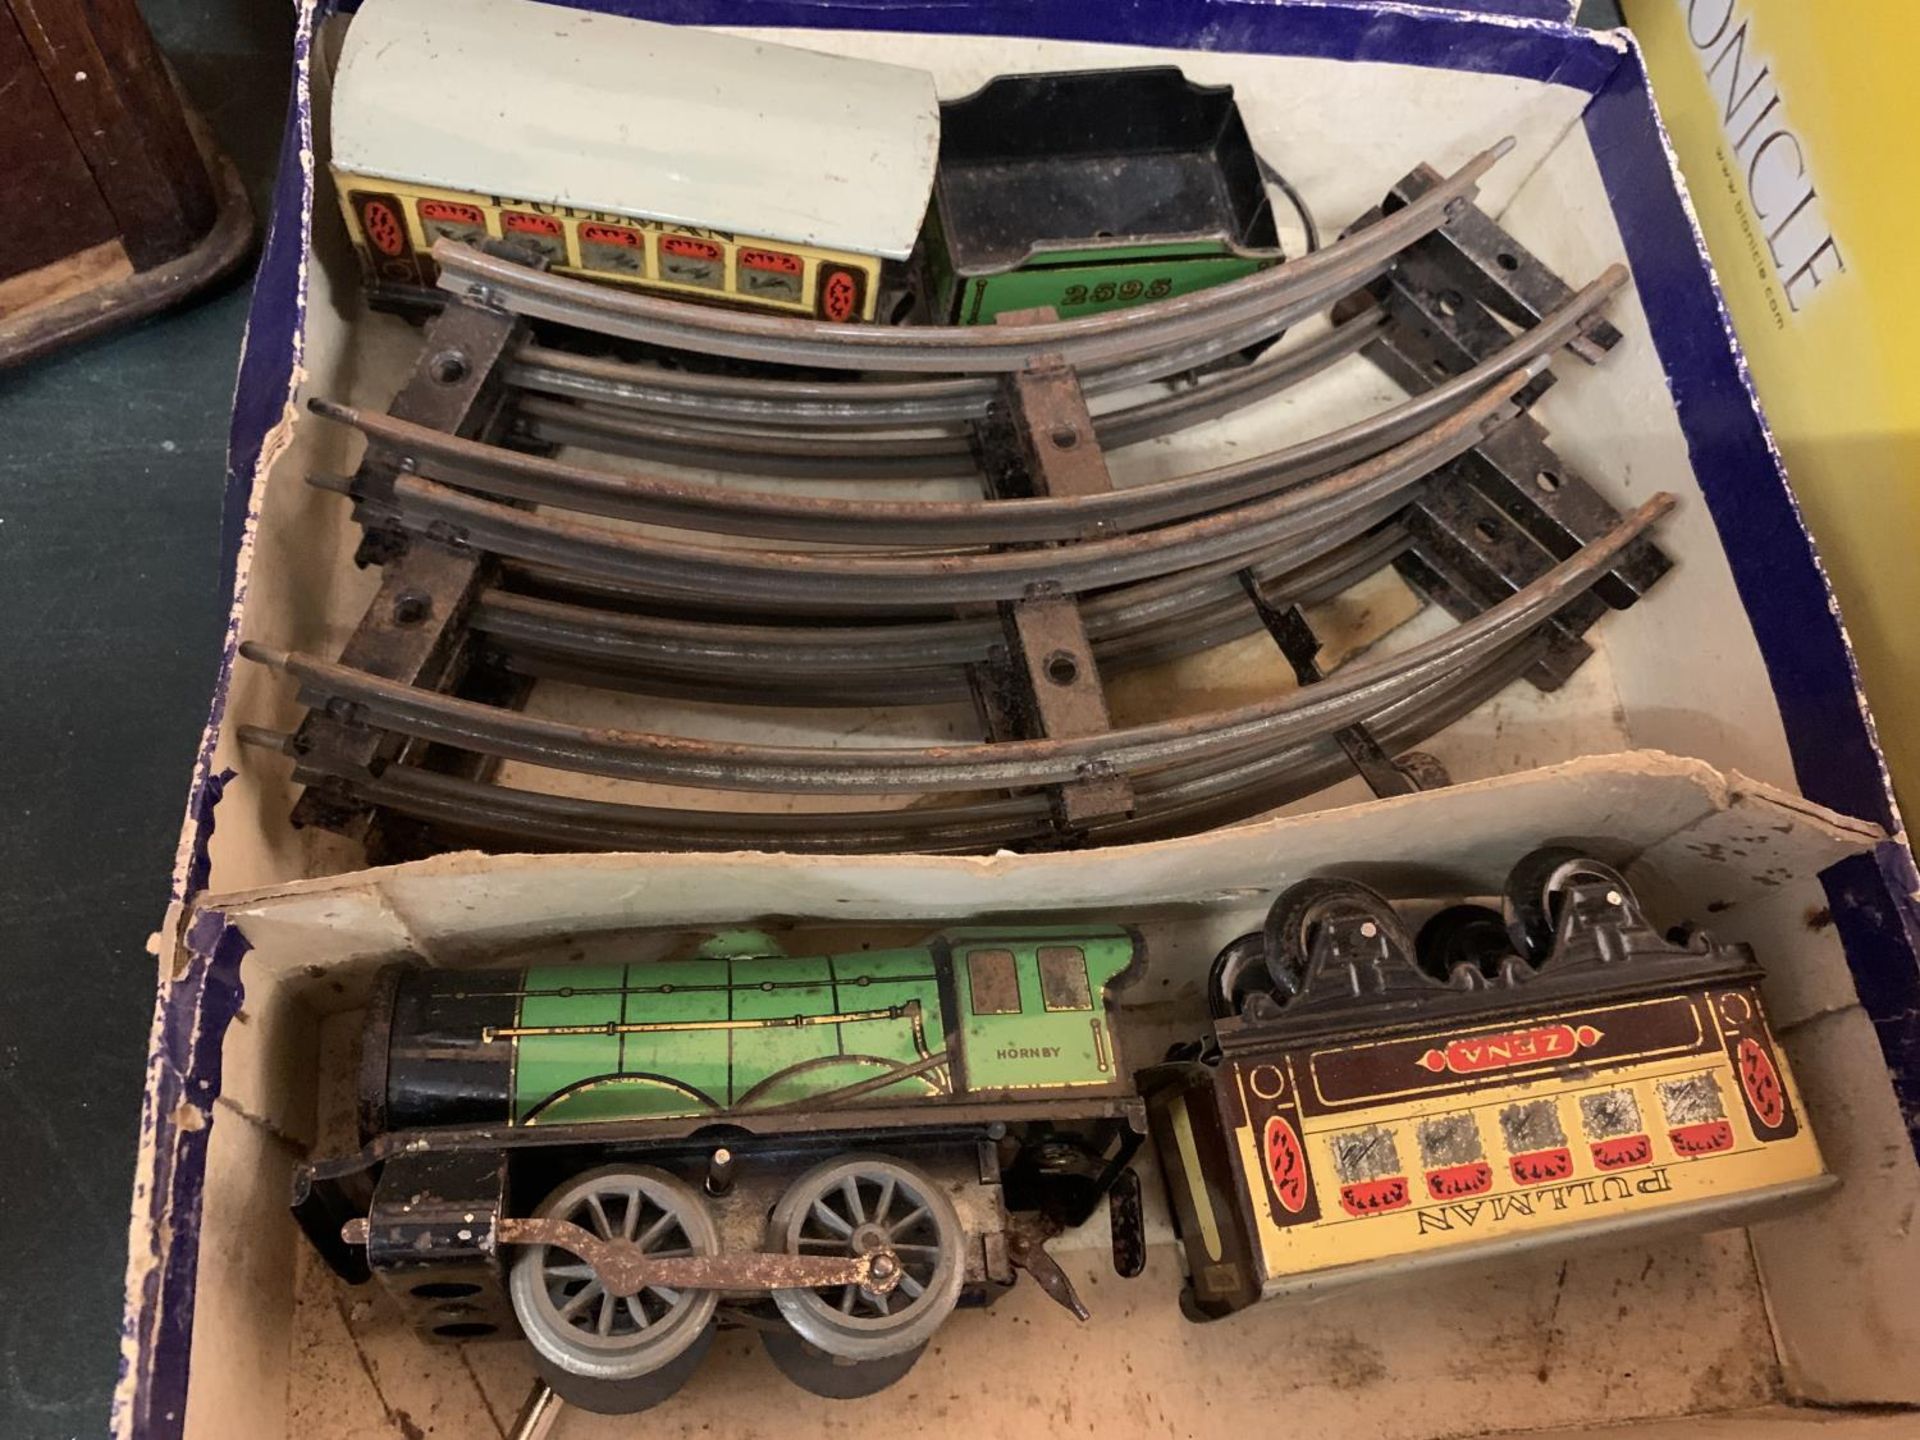 A BOXED VINTAGE HORNBY TRAIN SET TO INCLUDE AN ENGINE WITH TENDER, TWO PULLMAN CARRIAGES AND TRACK - Image 2 of 4